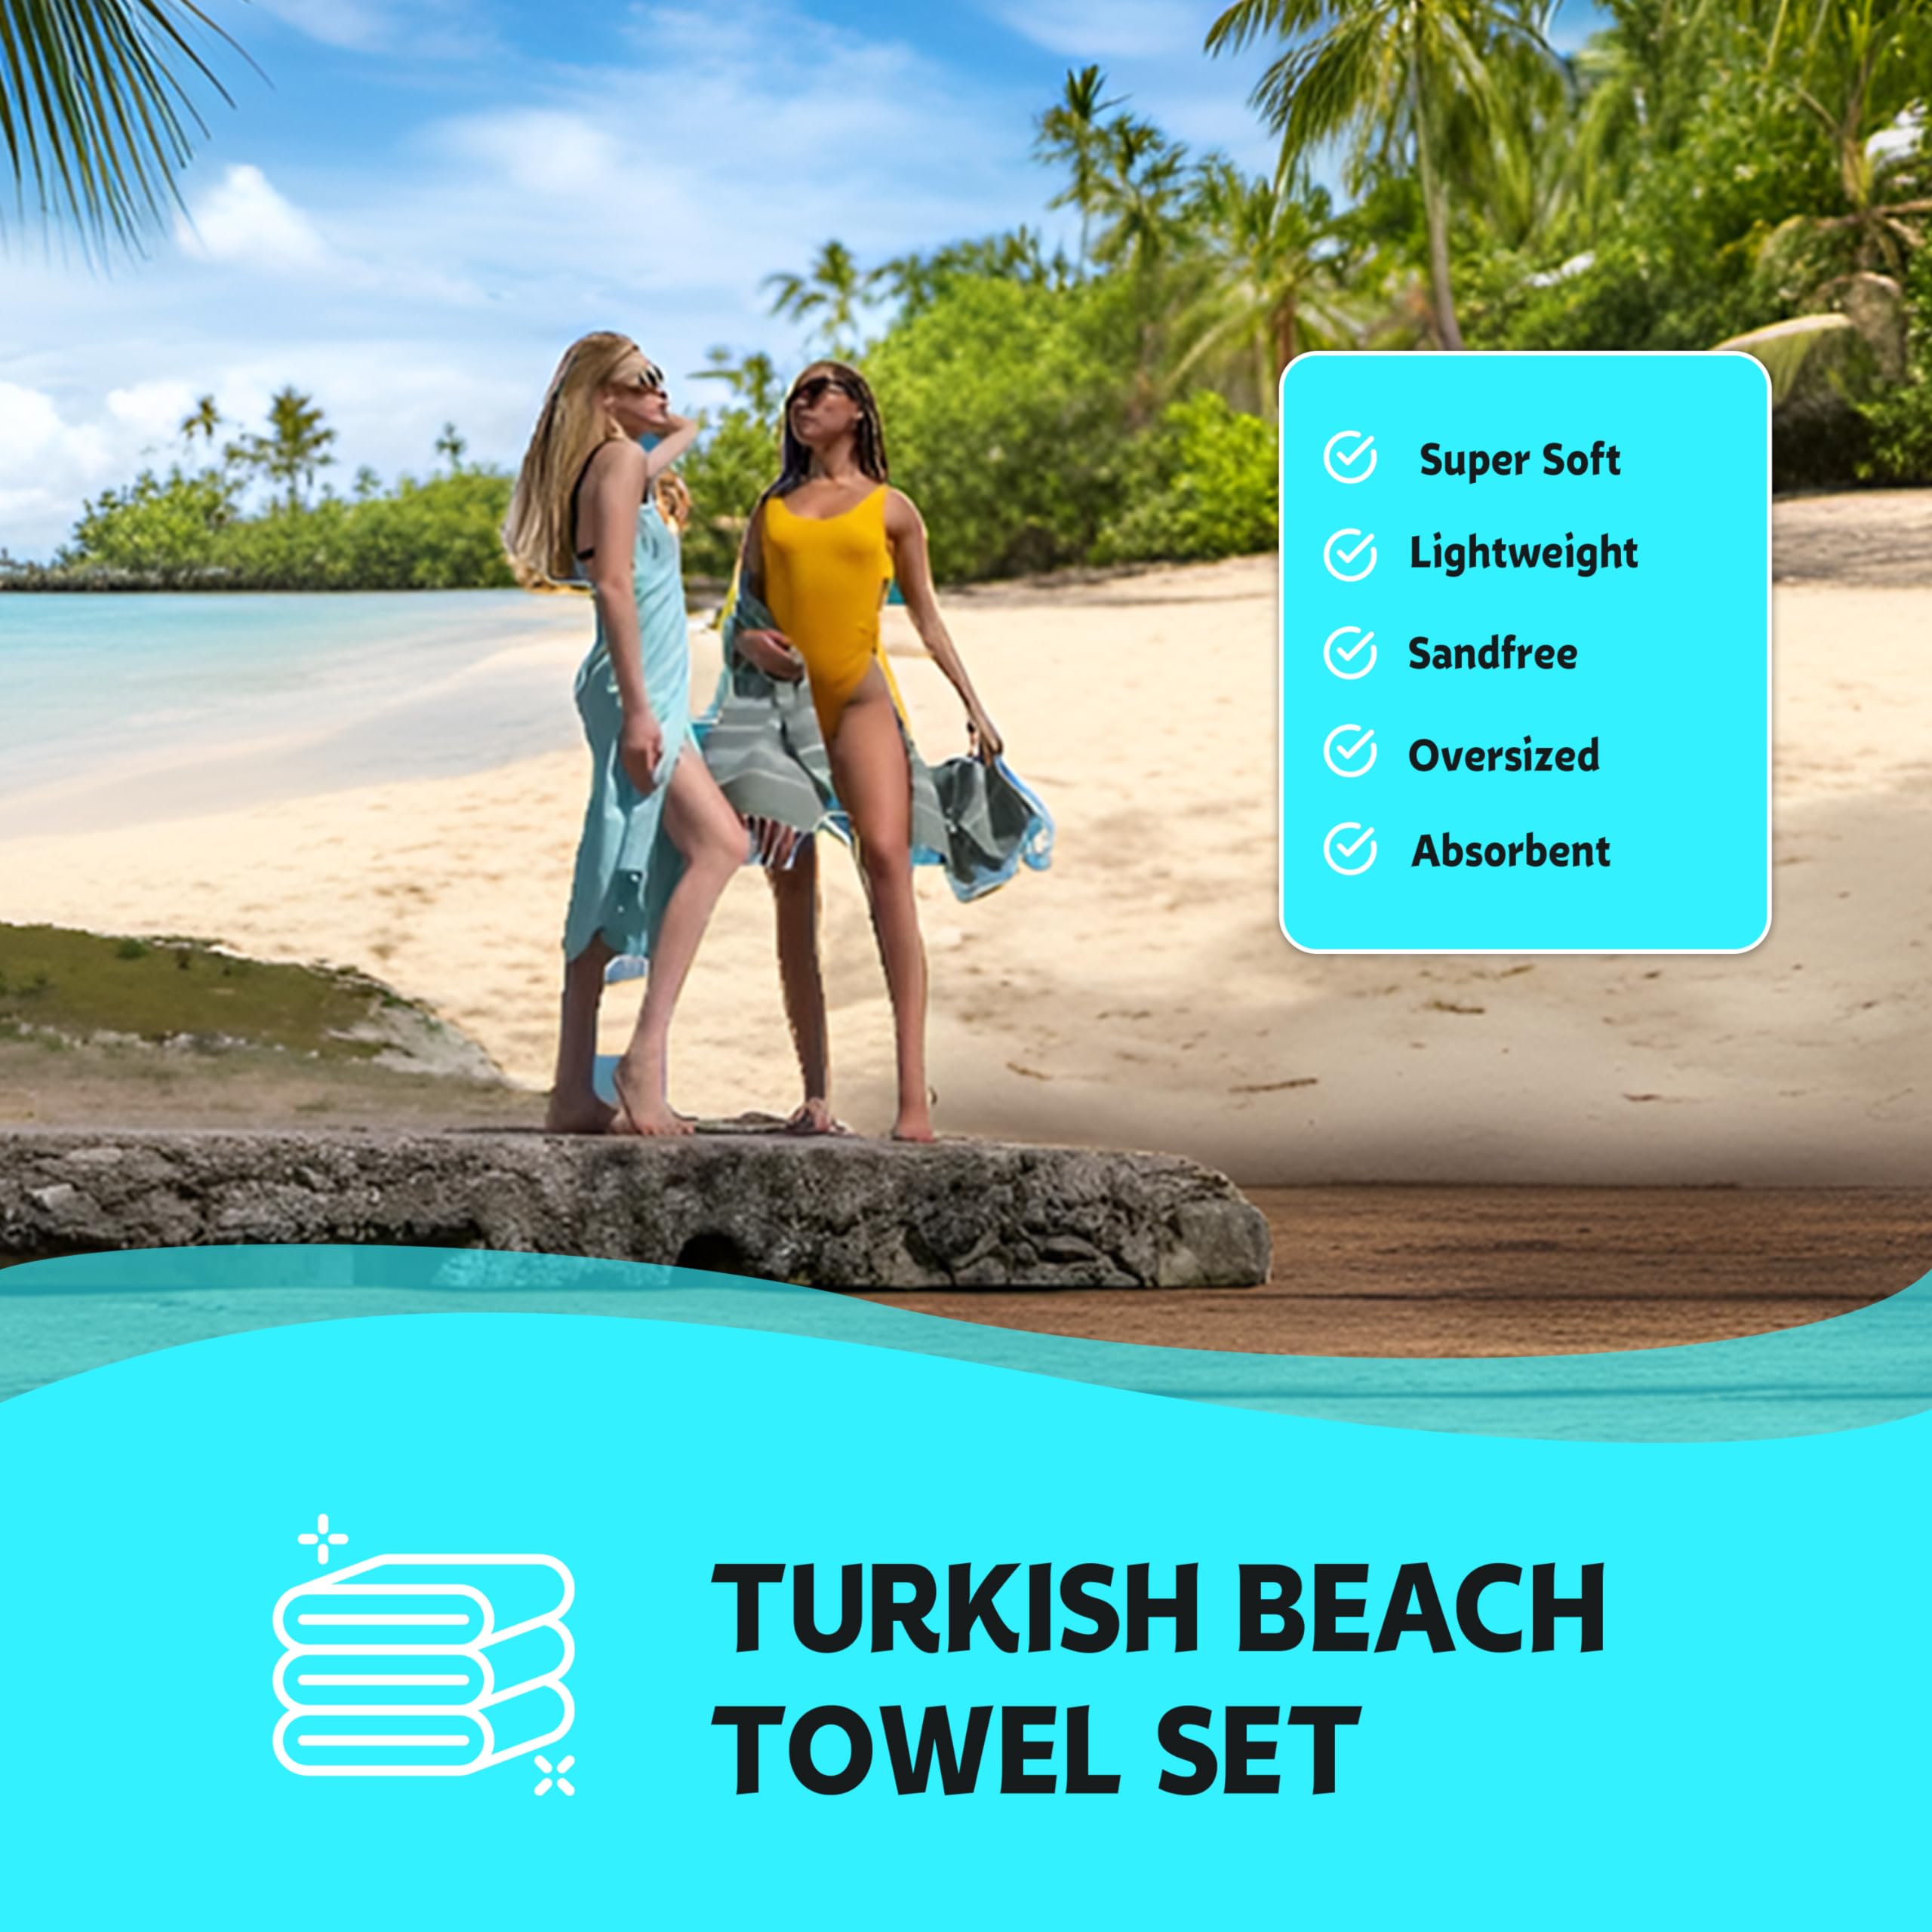 HAVLULAND Turkish Beach Towel Oversized 39x71 Turkish Bath Towels Highly Absorbent Quick Dry Extra Large Sand Free Beach Towels for Beach Pool Spa Gym Yoga Travel Camping Blanket - Olive Green